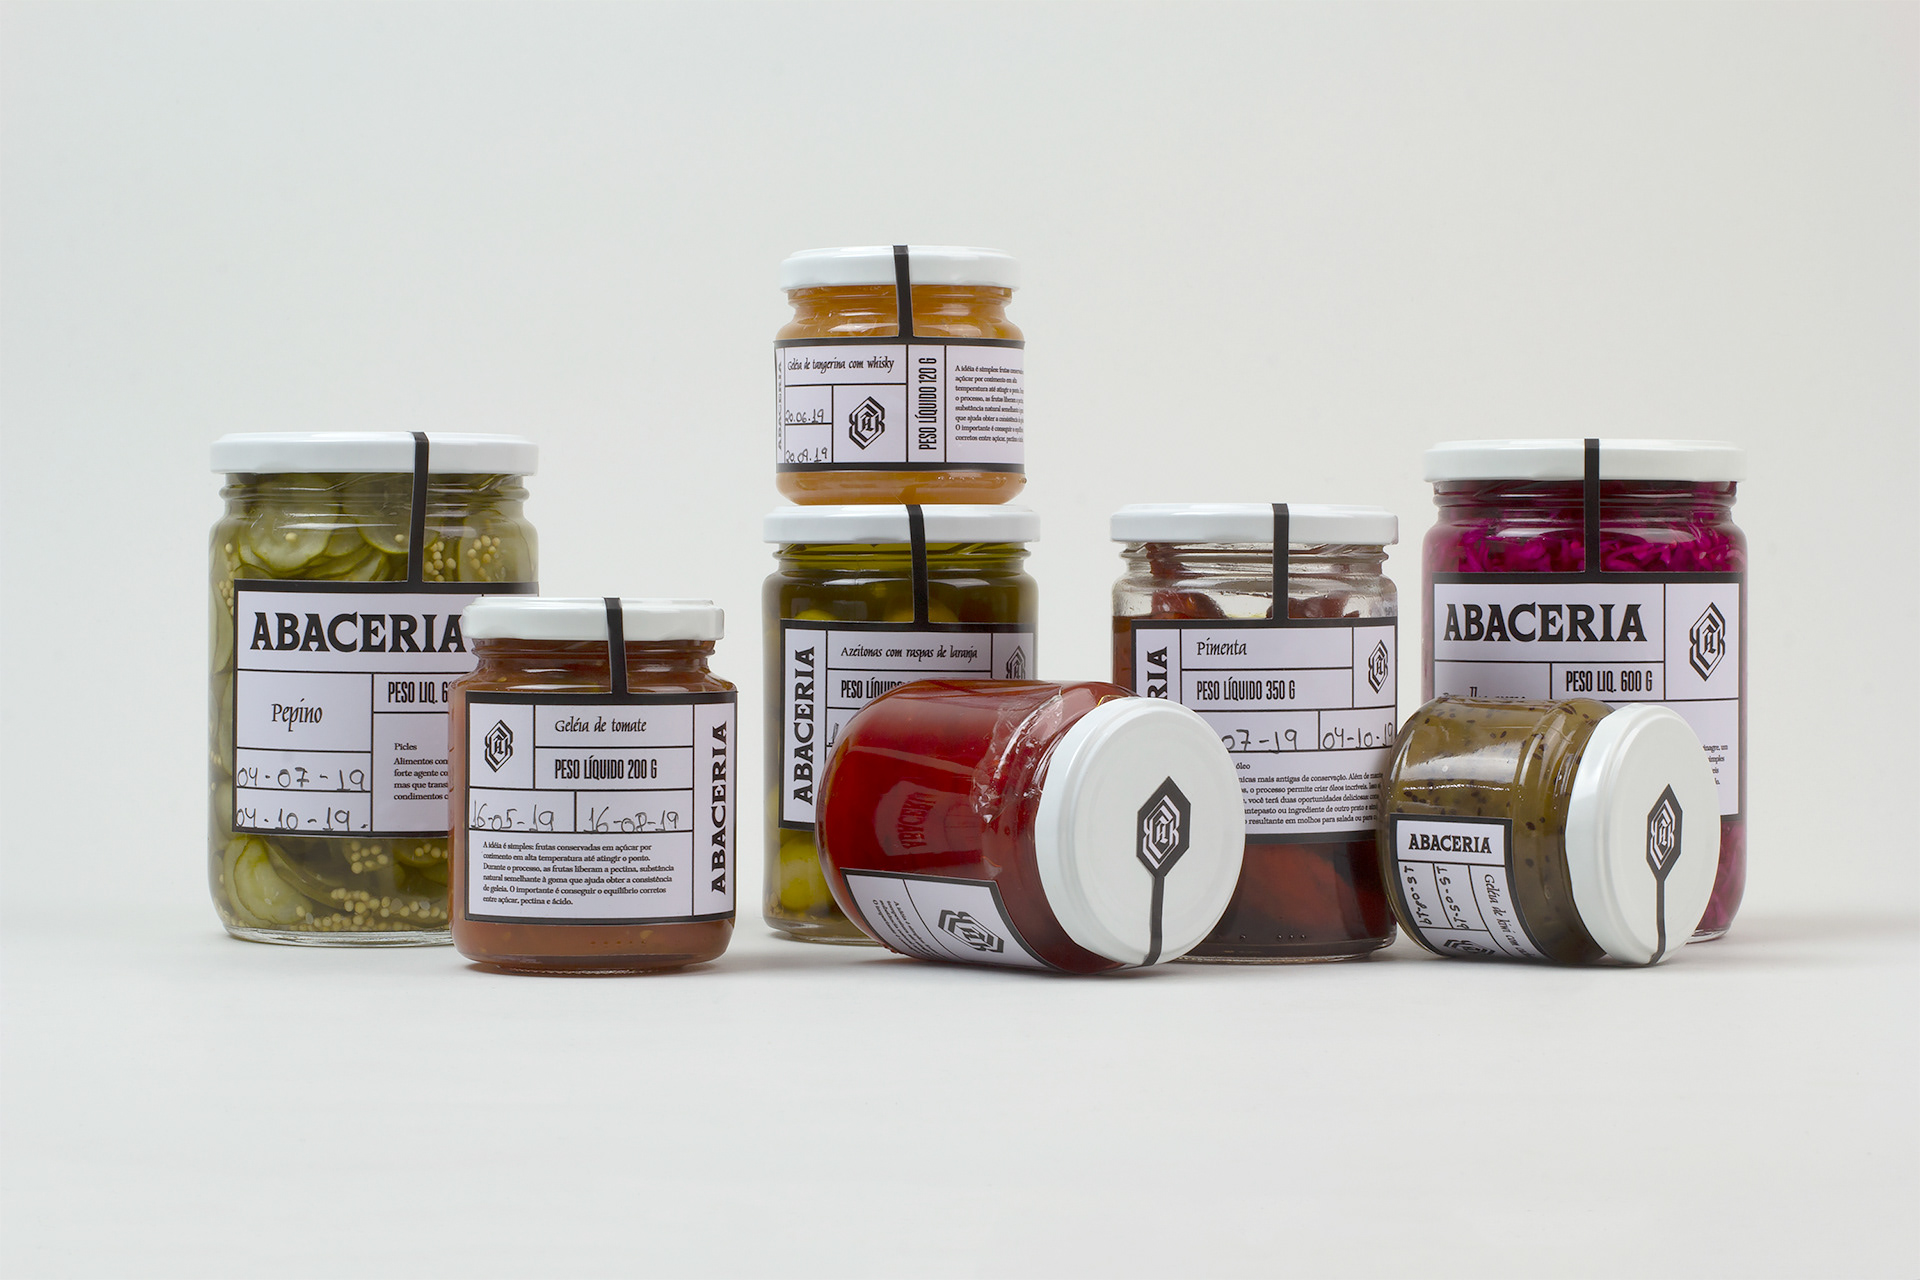 ABACERIA Branding and Visual Identity